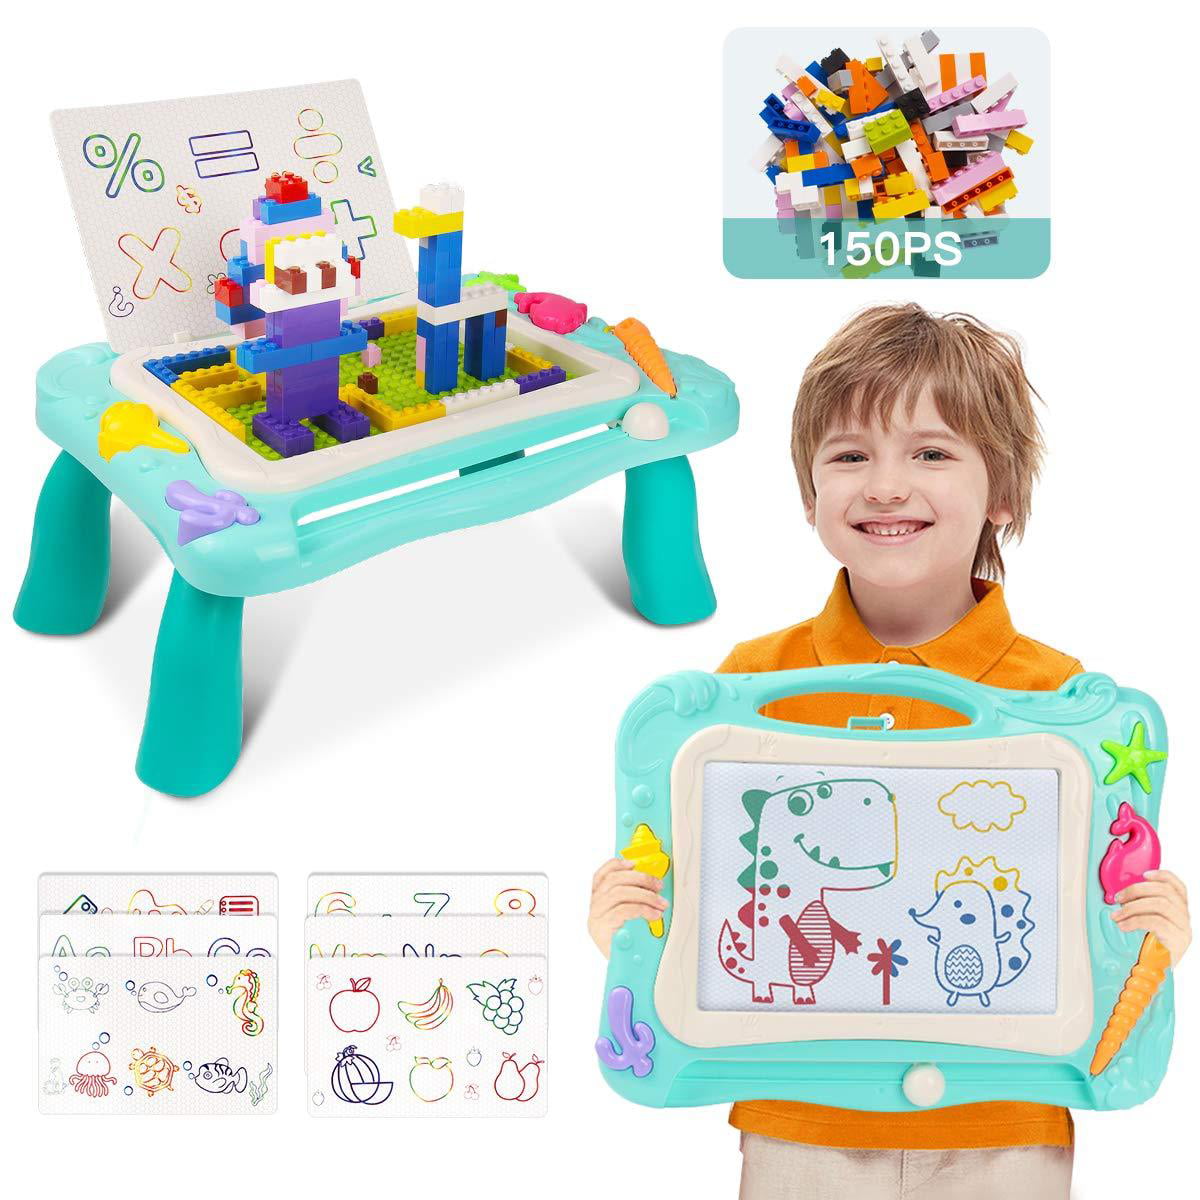 BUENAVO Kids Activity Table Set-2 in 1 Magnetic Drawing Board and Building Brick Table with 150pcs Bricks,Magnetic Colorful Writing Sketch Board Toys for 2 3 4 5 Year Old Boys Girls